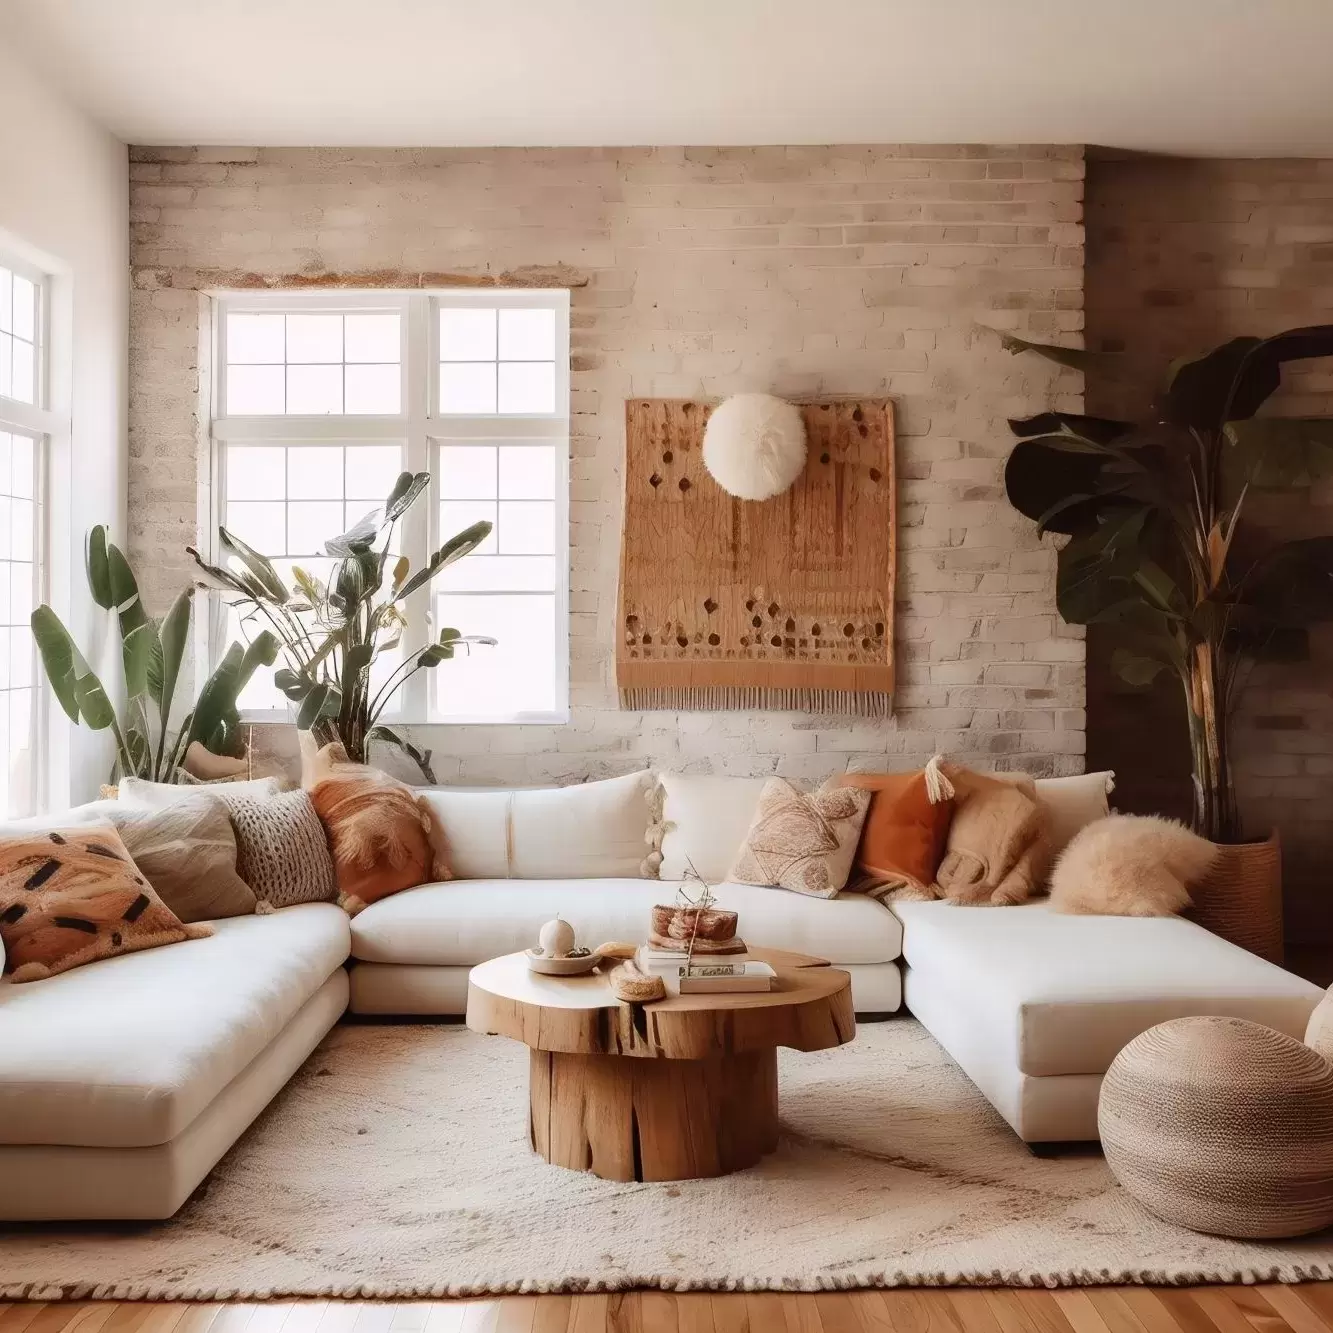 Living room with earth tones throughout walls and decor